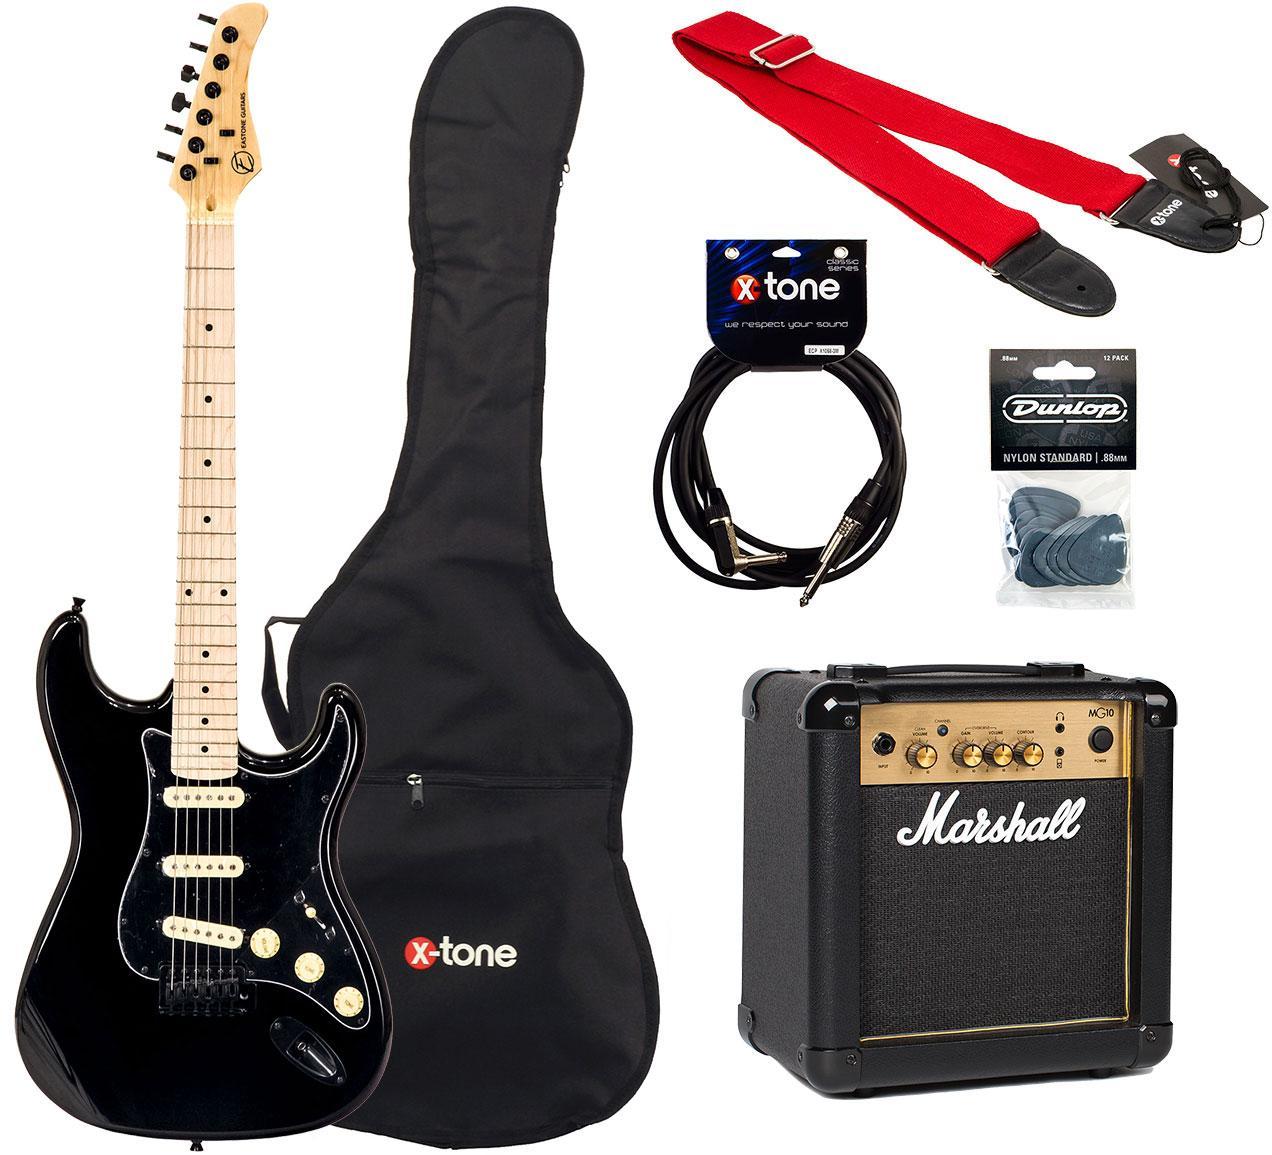 Electric guitar set Eastone STR70 GIL +MARSHALL MG10 +HOUSSE +COURROIE +CABLE +MEDIATORS - Black